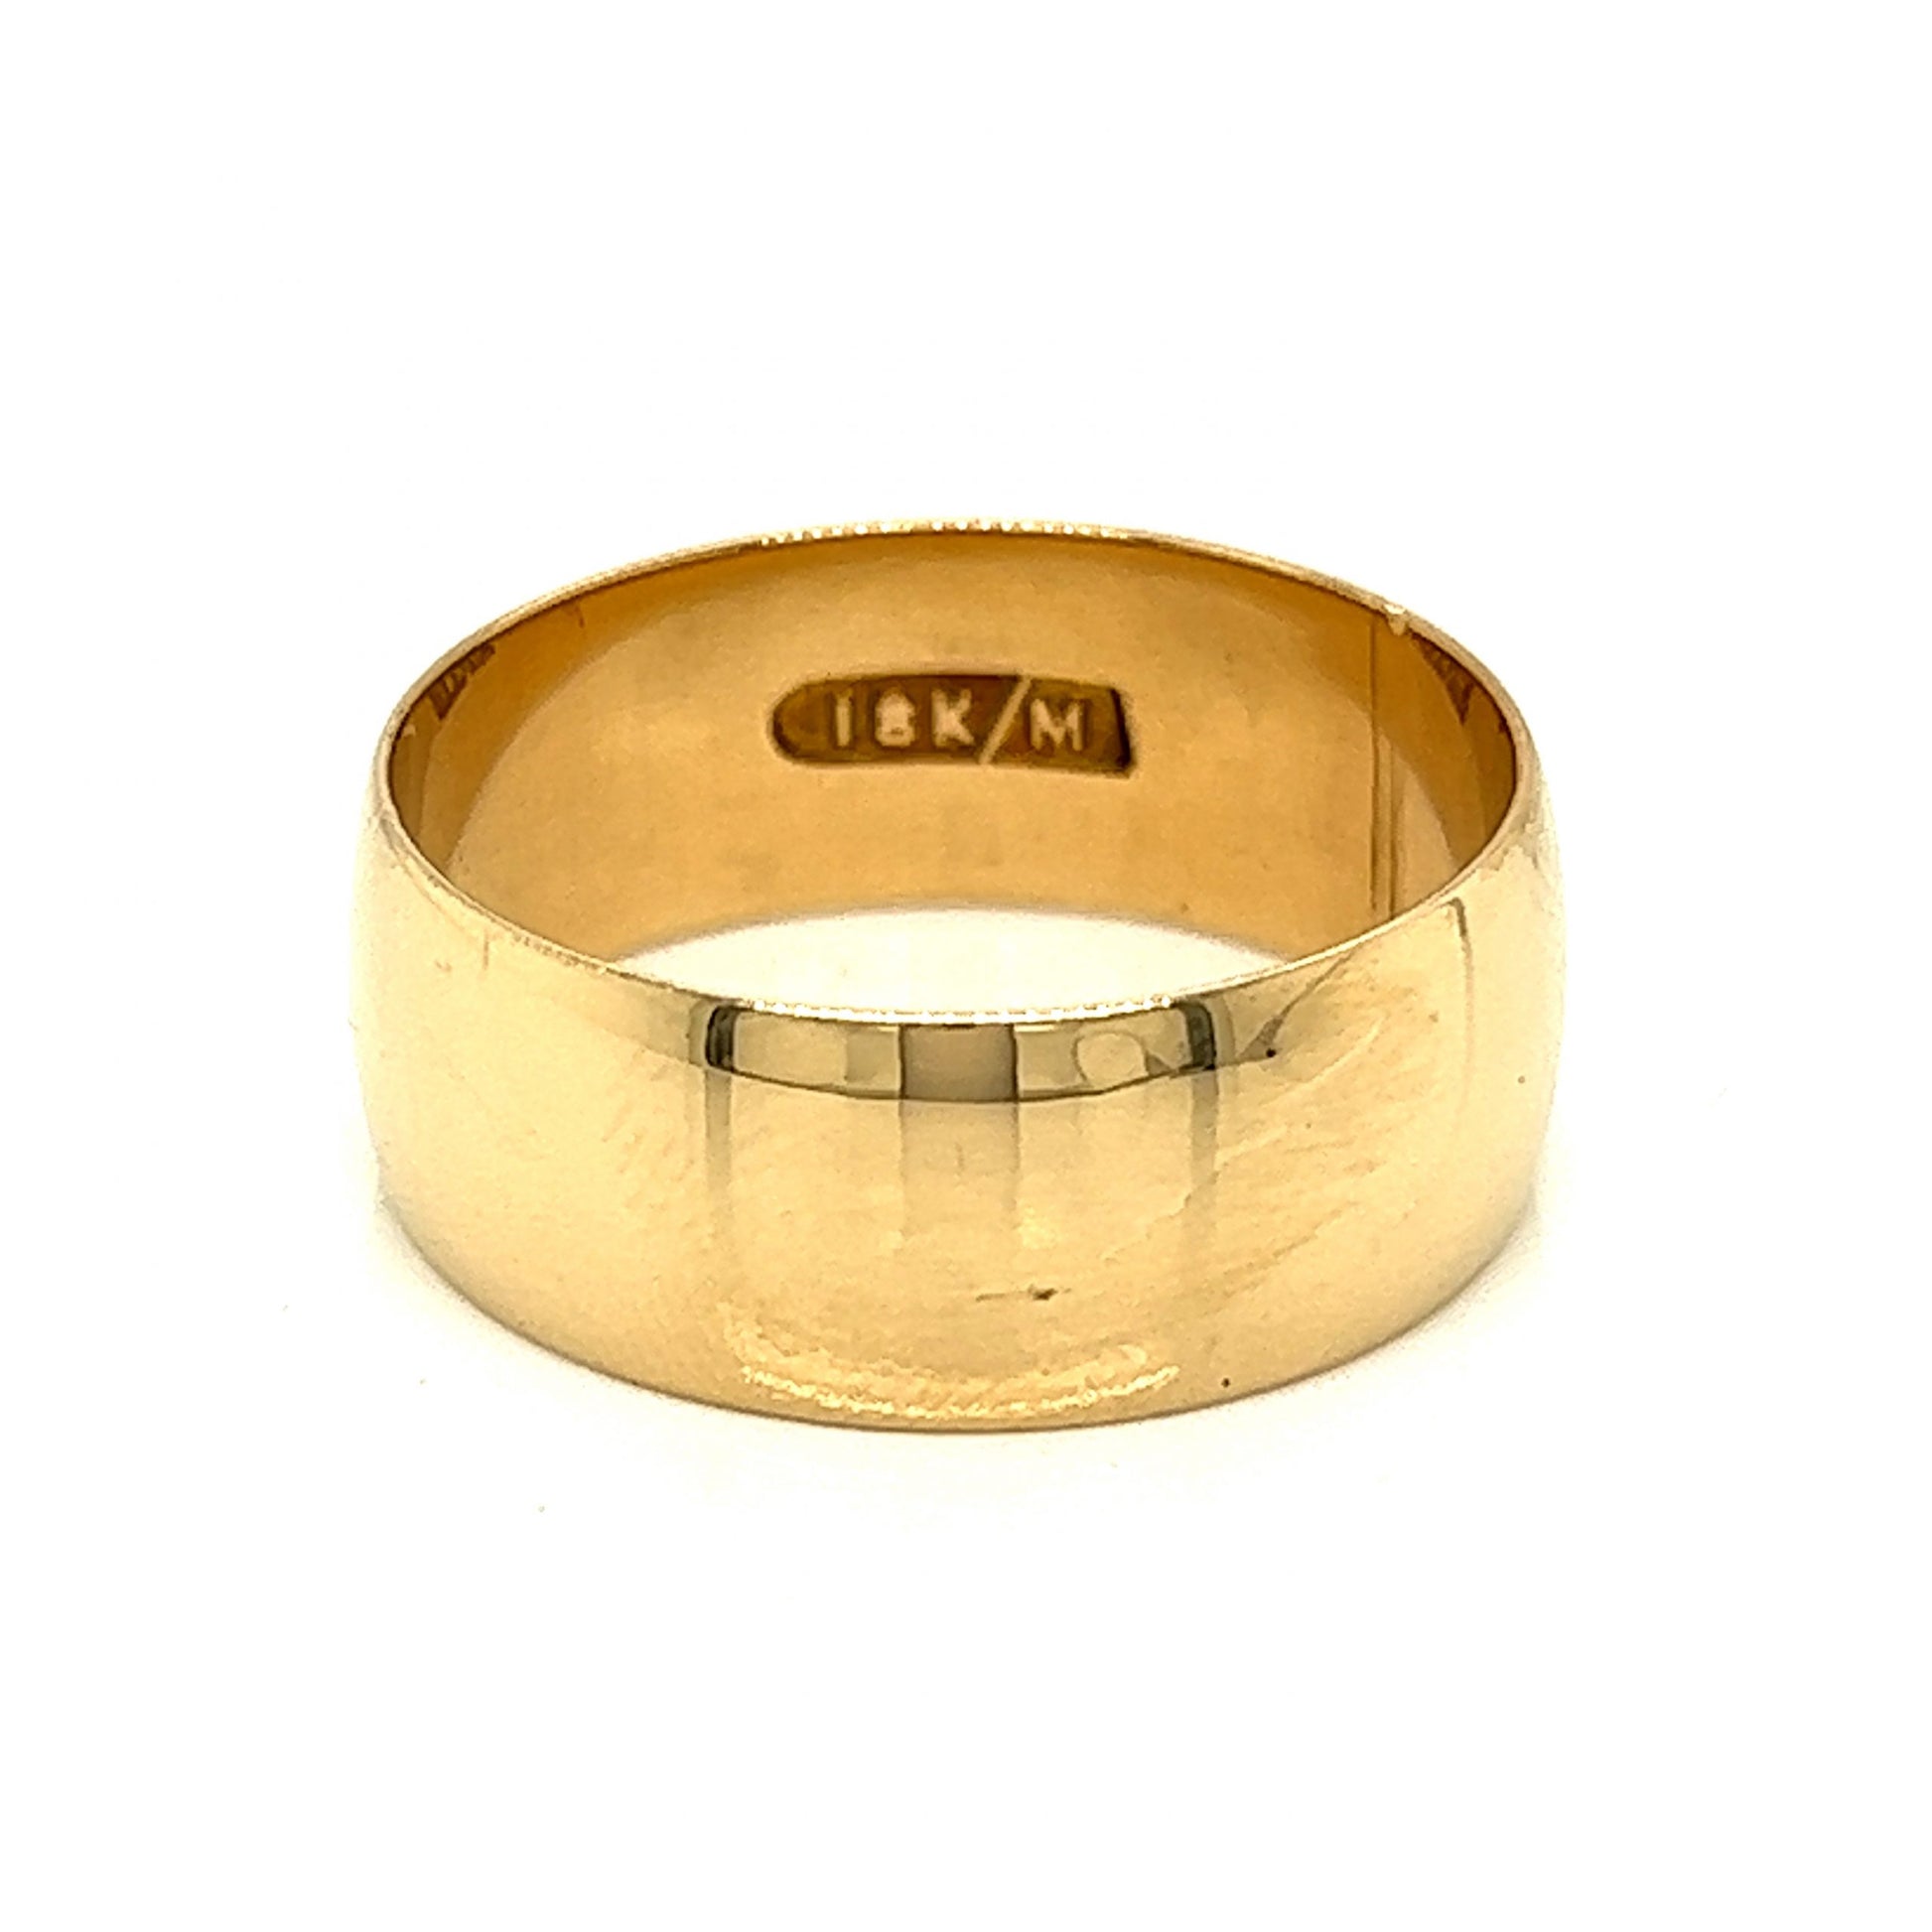 Men's Victorian Wide Wedding Band in 18k Yellow GoldComposition: 18 Karat Yellow Gold Ring Size: 10 Total Gram Weight: 6.8 g Inscription: 18K/M
      